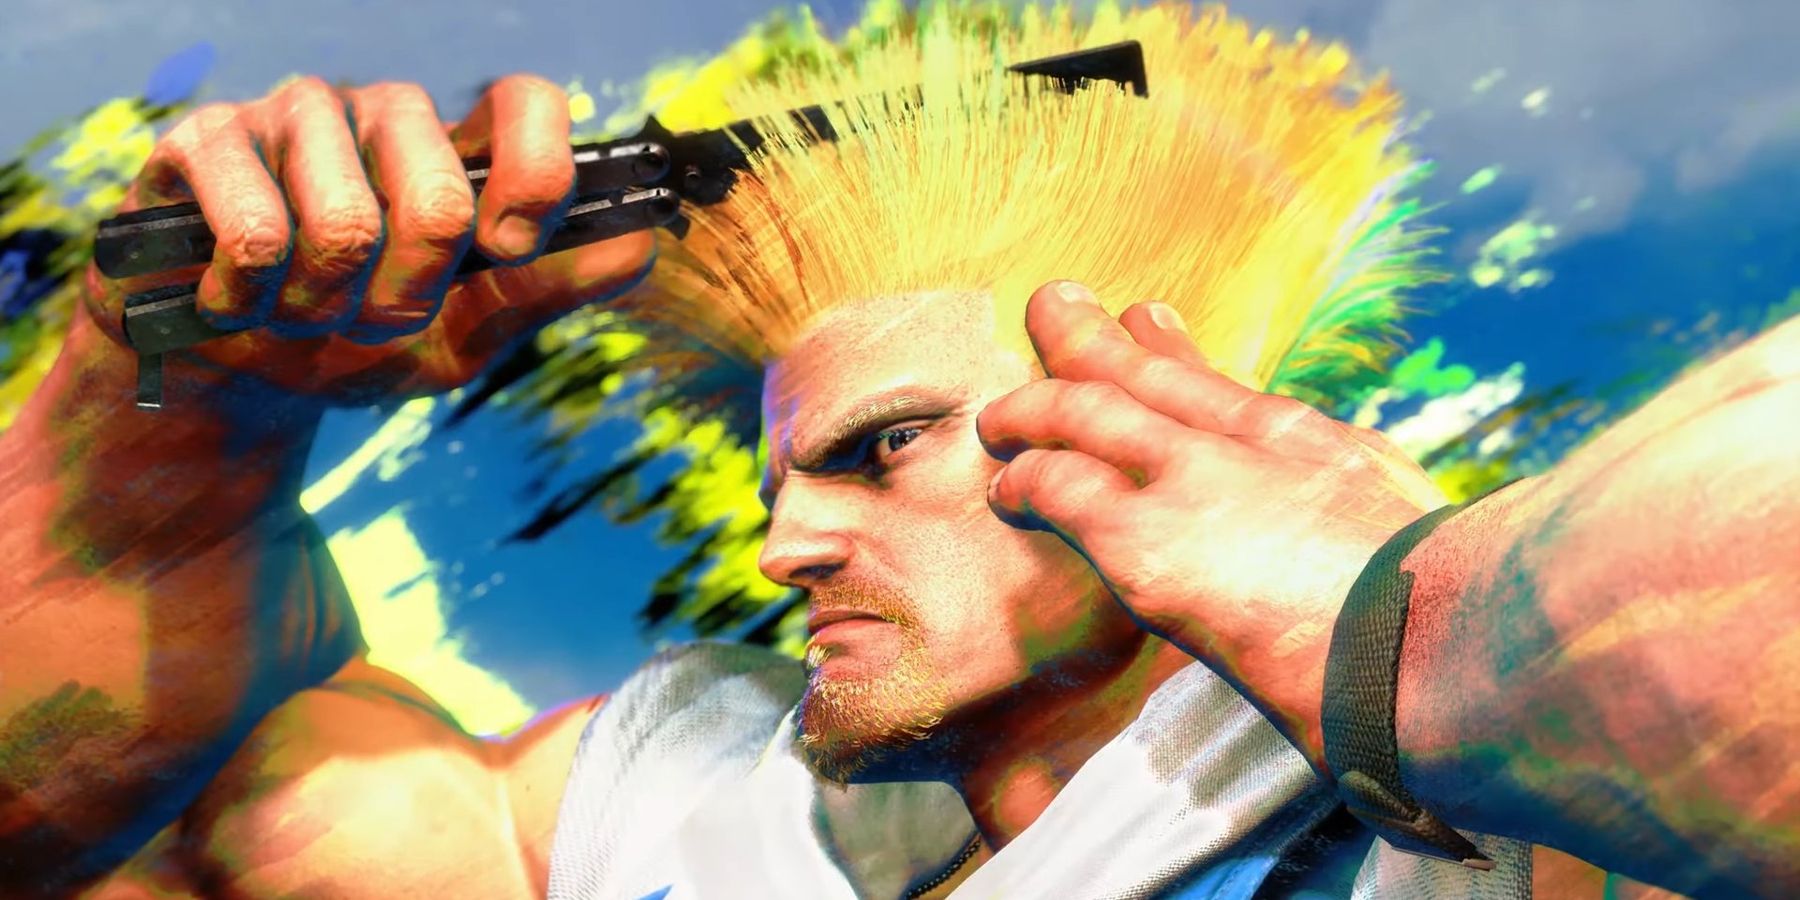 Guile fixing his hair in Street Fighter 6